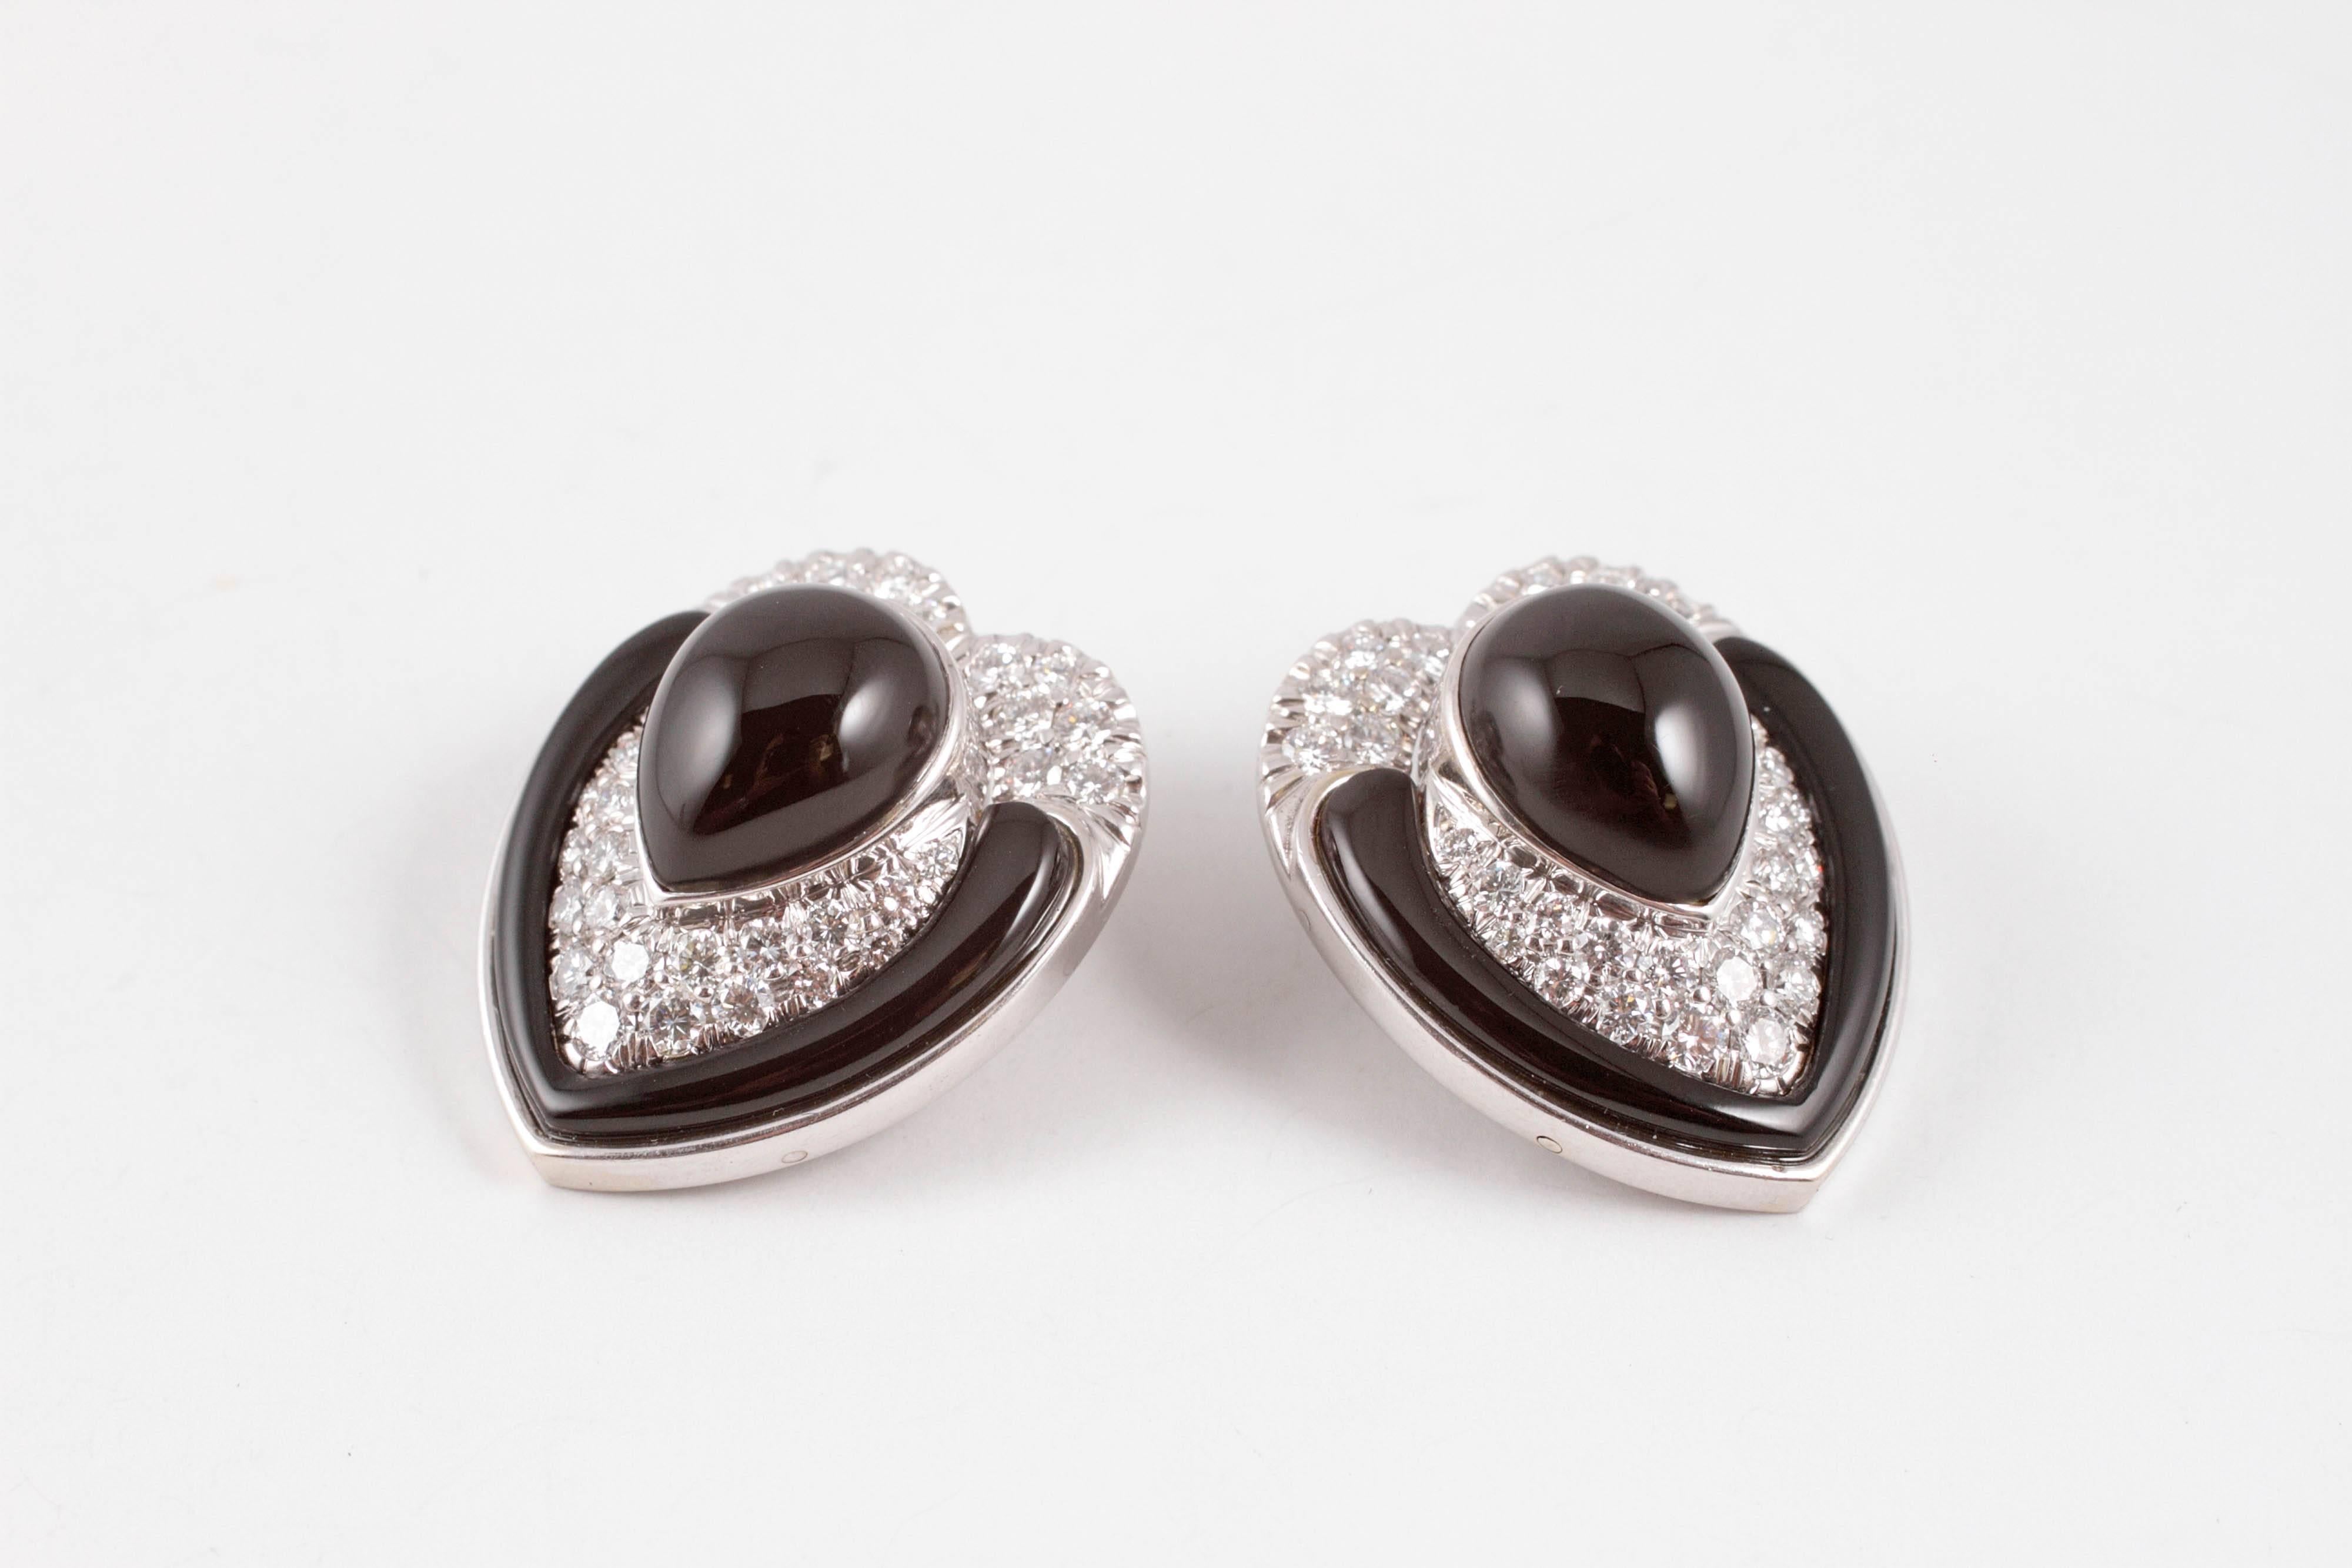 Such a bold look!  In 14 and 18 karat white gold, with 2.50 carats of diamonds - these are stunning!